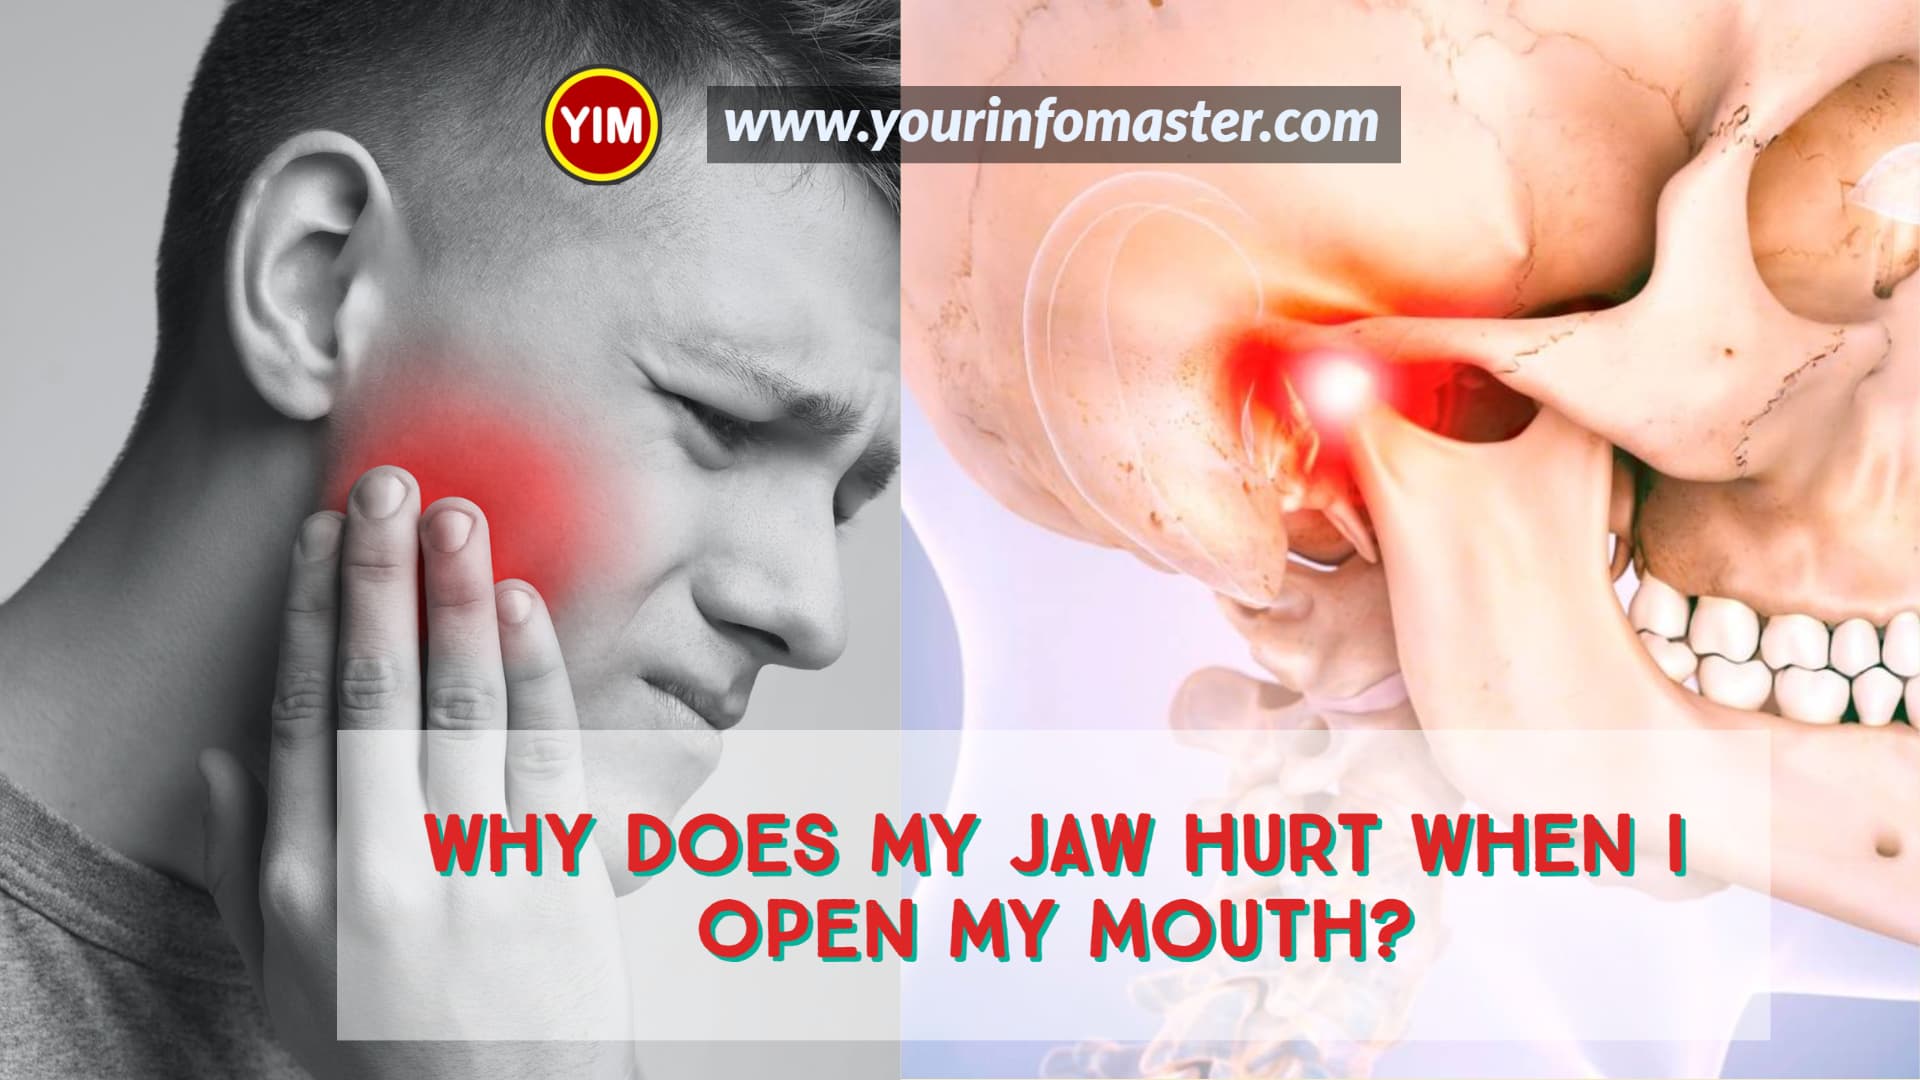 Causes of Ear and Jaw Pain, Why Does My Jaw Hurt on One Side, Why Does my Jaw Hurt When I Open my Mouth